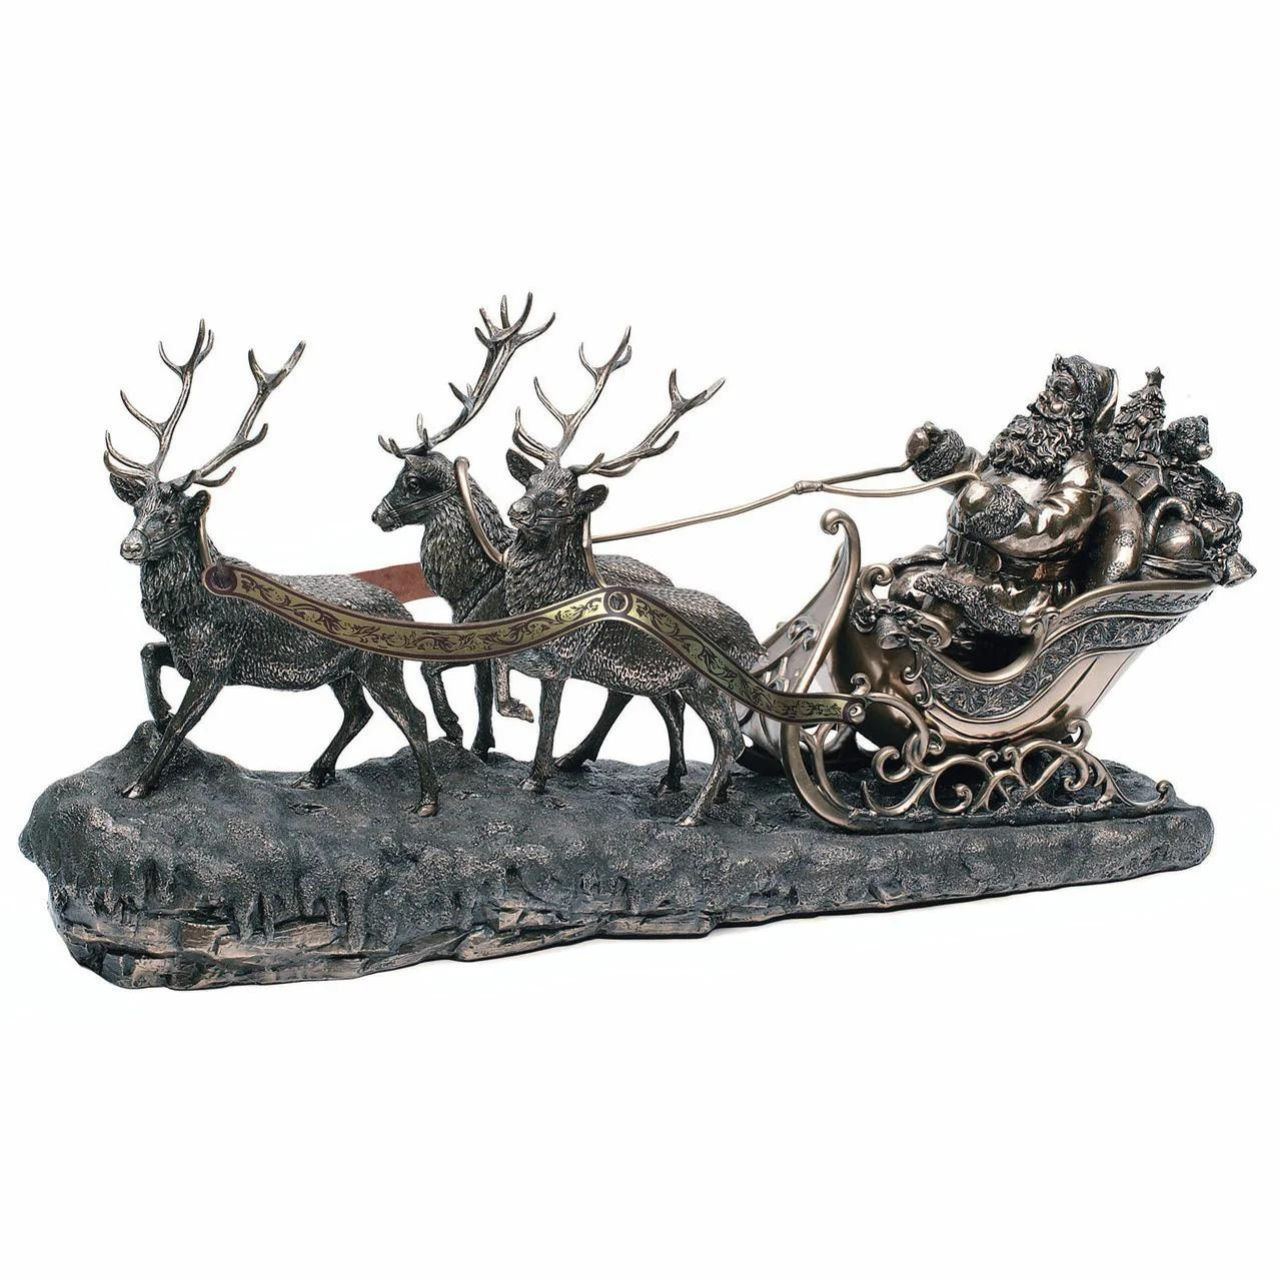 Genesis Santa on Sleigh  Beautifully crafted from cast bronze and handcrafted, this Santa on Sleigh sculpture will make a beautiful addition to your home during the holidays. Intricately detailed, this Santa Claus features three reindeer's pulling his sleigh.